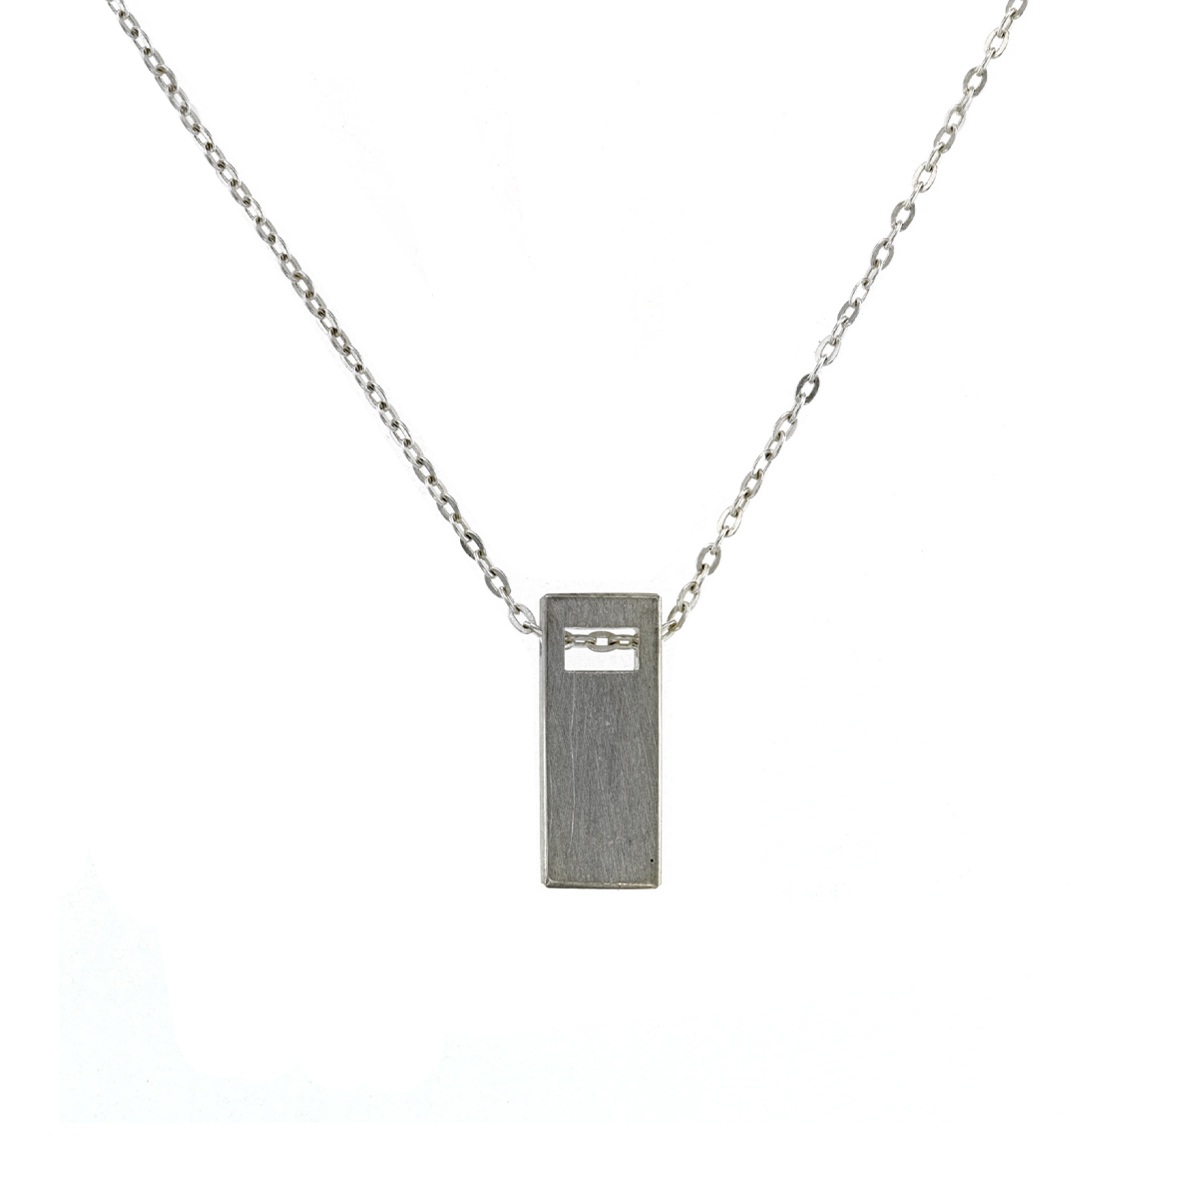 Sterling Silver Rectangular Cutout Pendant with Chain